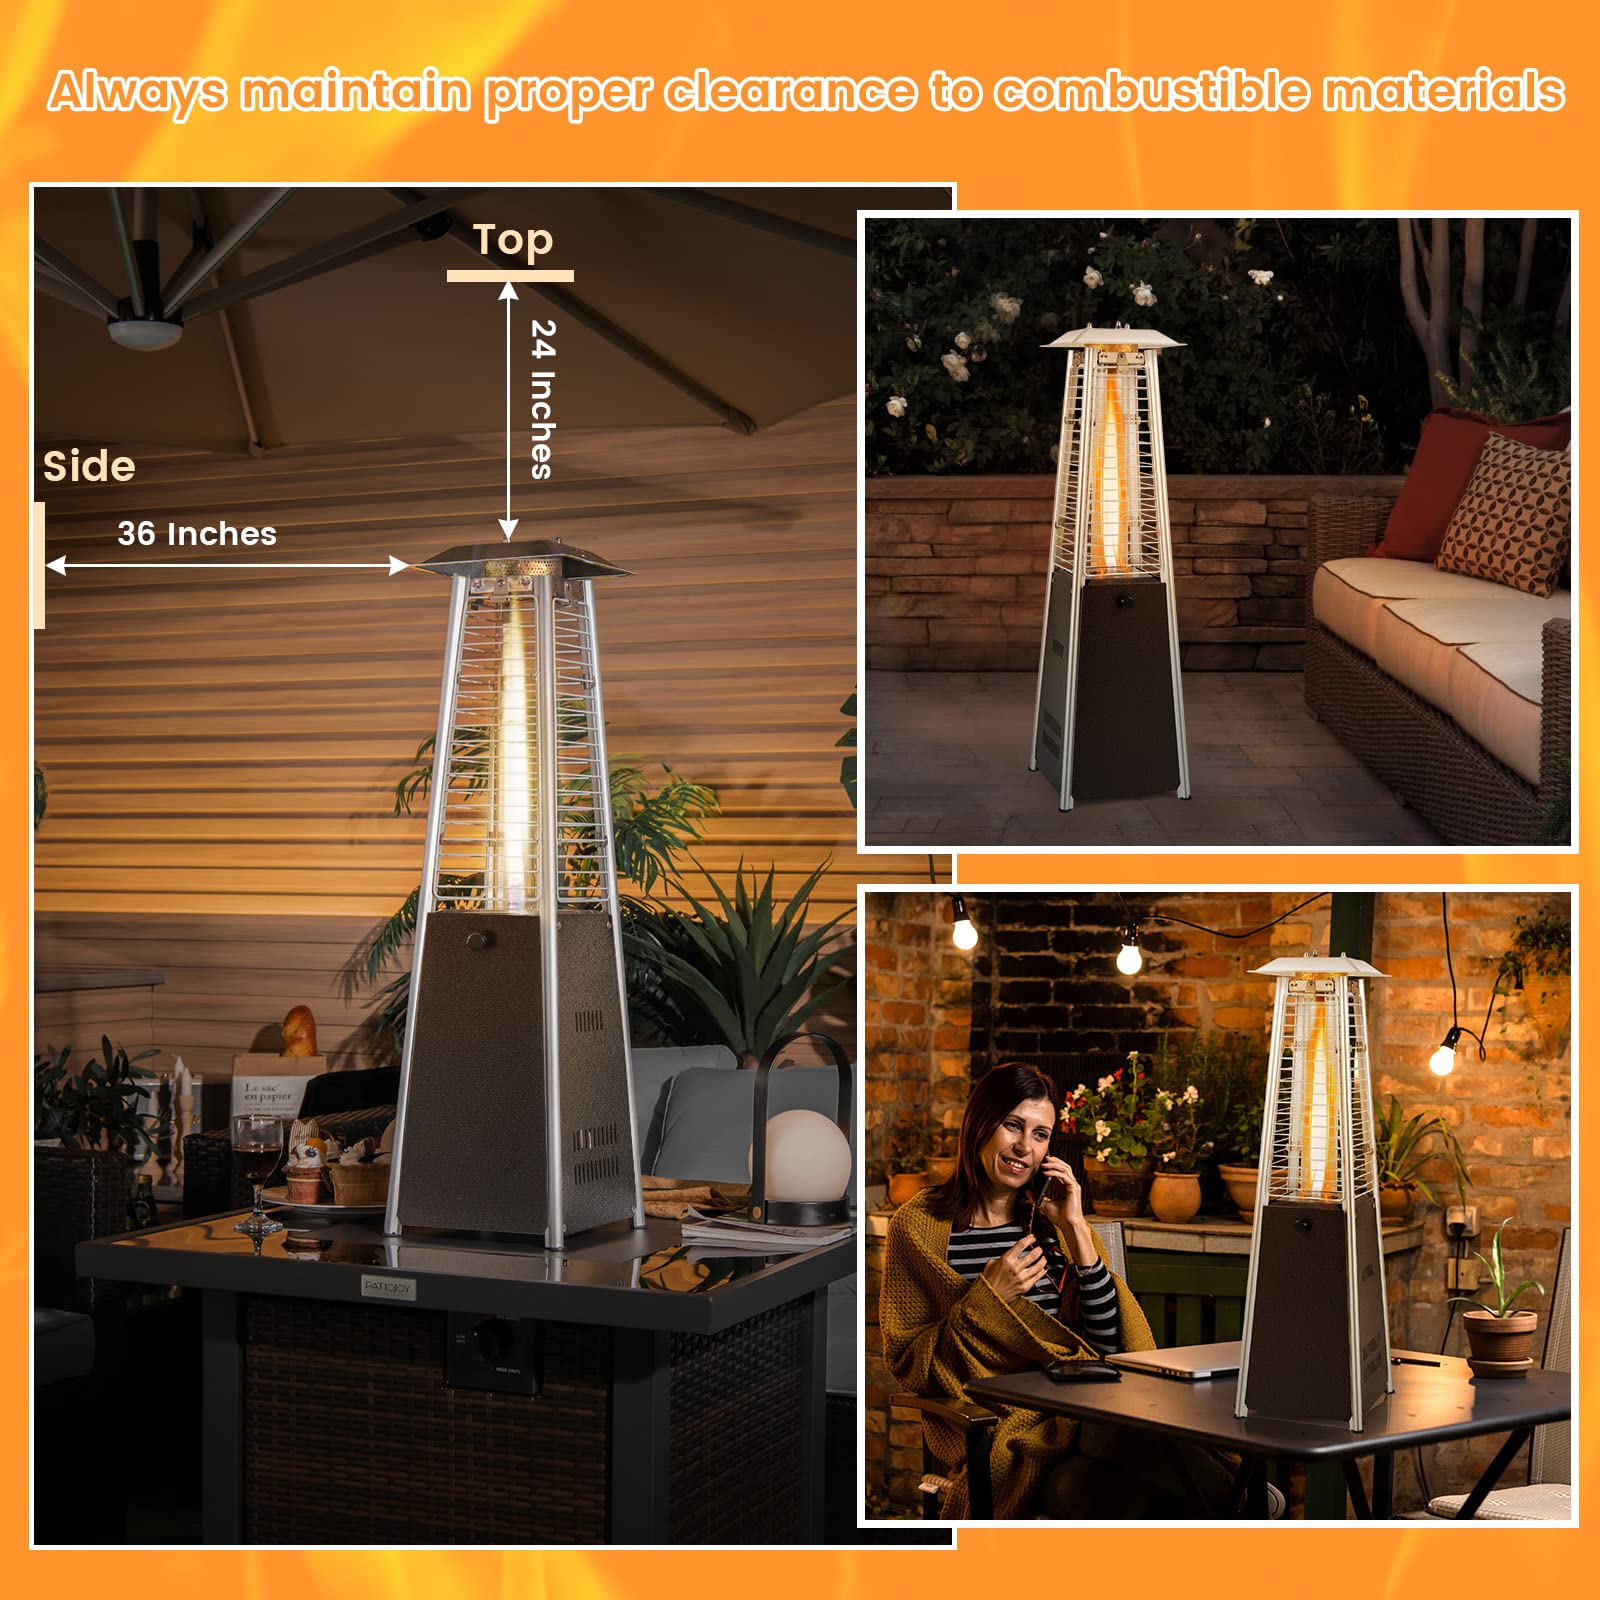 Giantex Pyramid Patio Heater, 9500 BTU Tabletop Portable Propane Heater w/Glass Tube, Simple Ignition System, Dancing Flame, CSA Certification, 35" Outdoor Electric Heater for Backyard Garden, Bronze